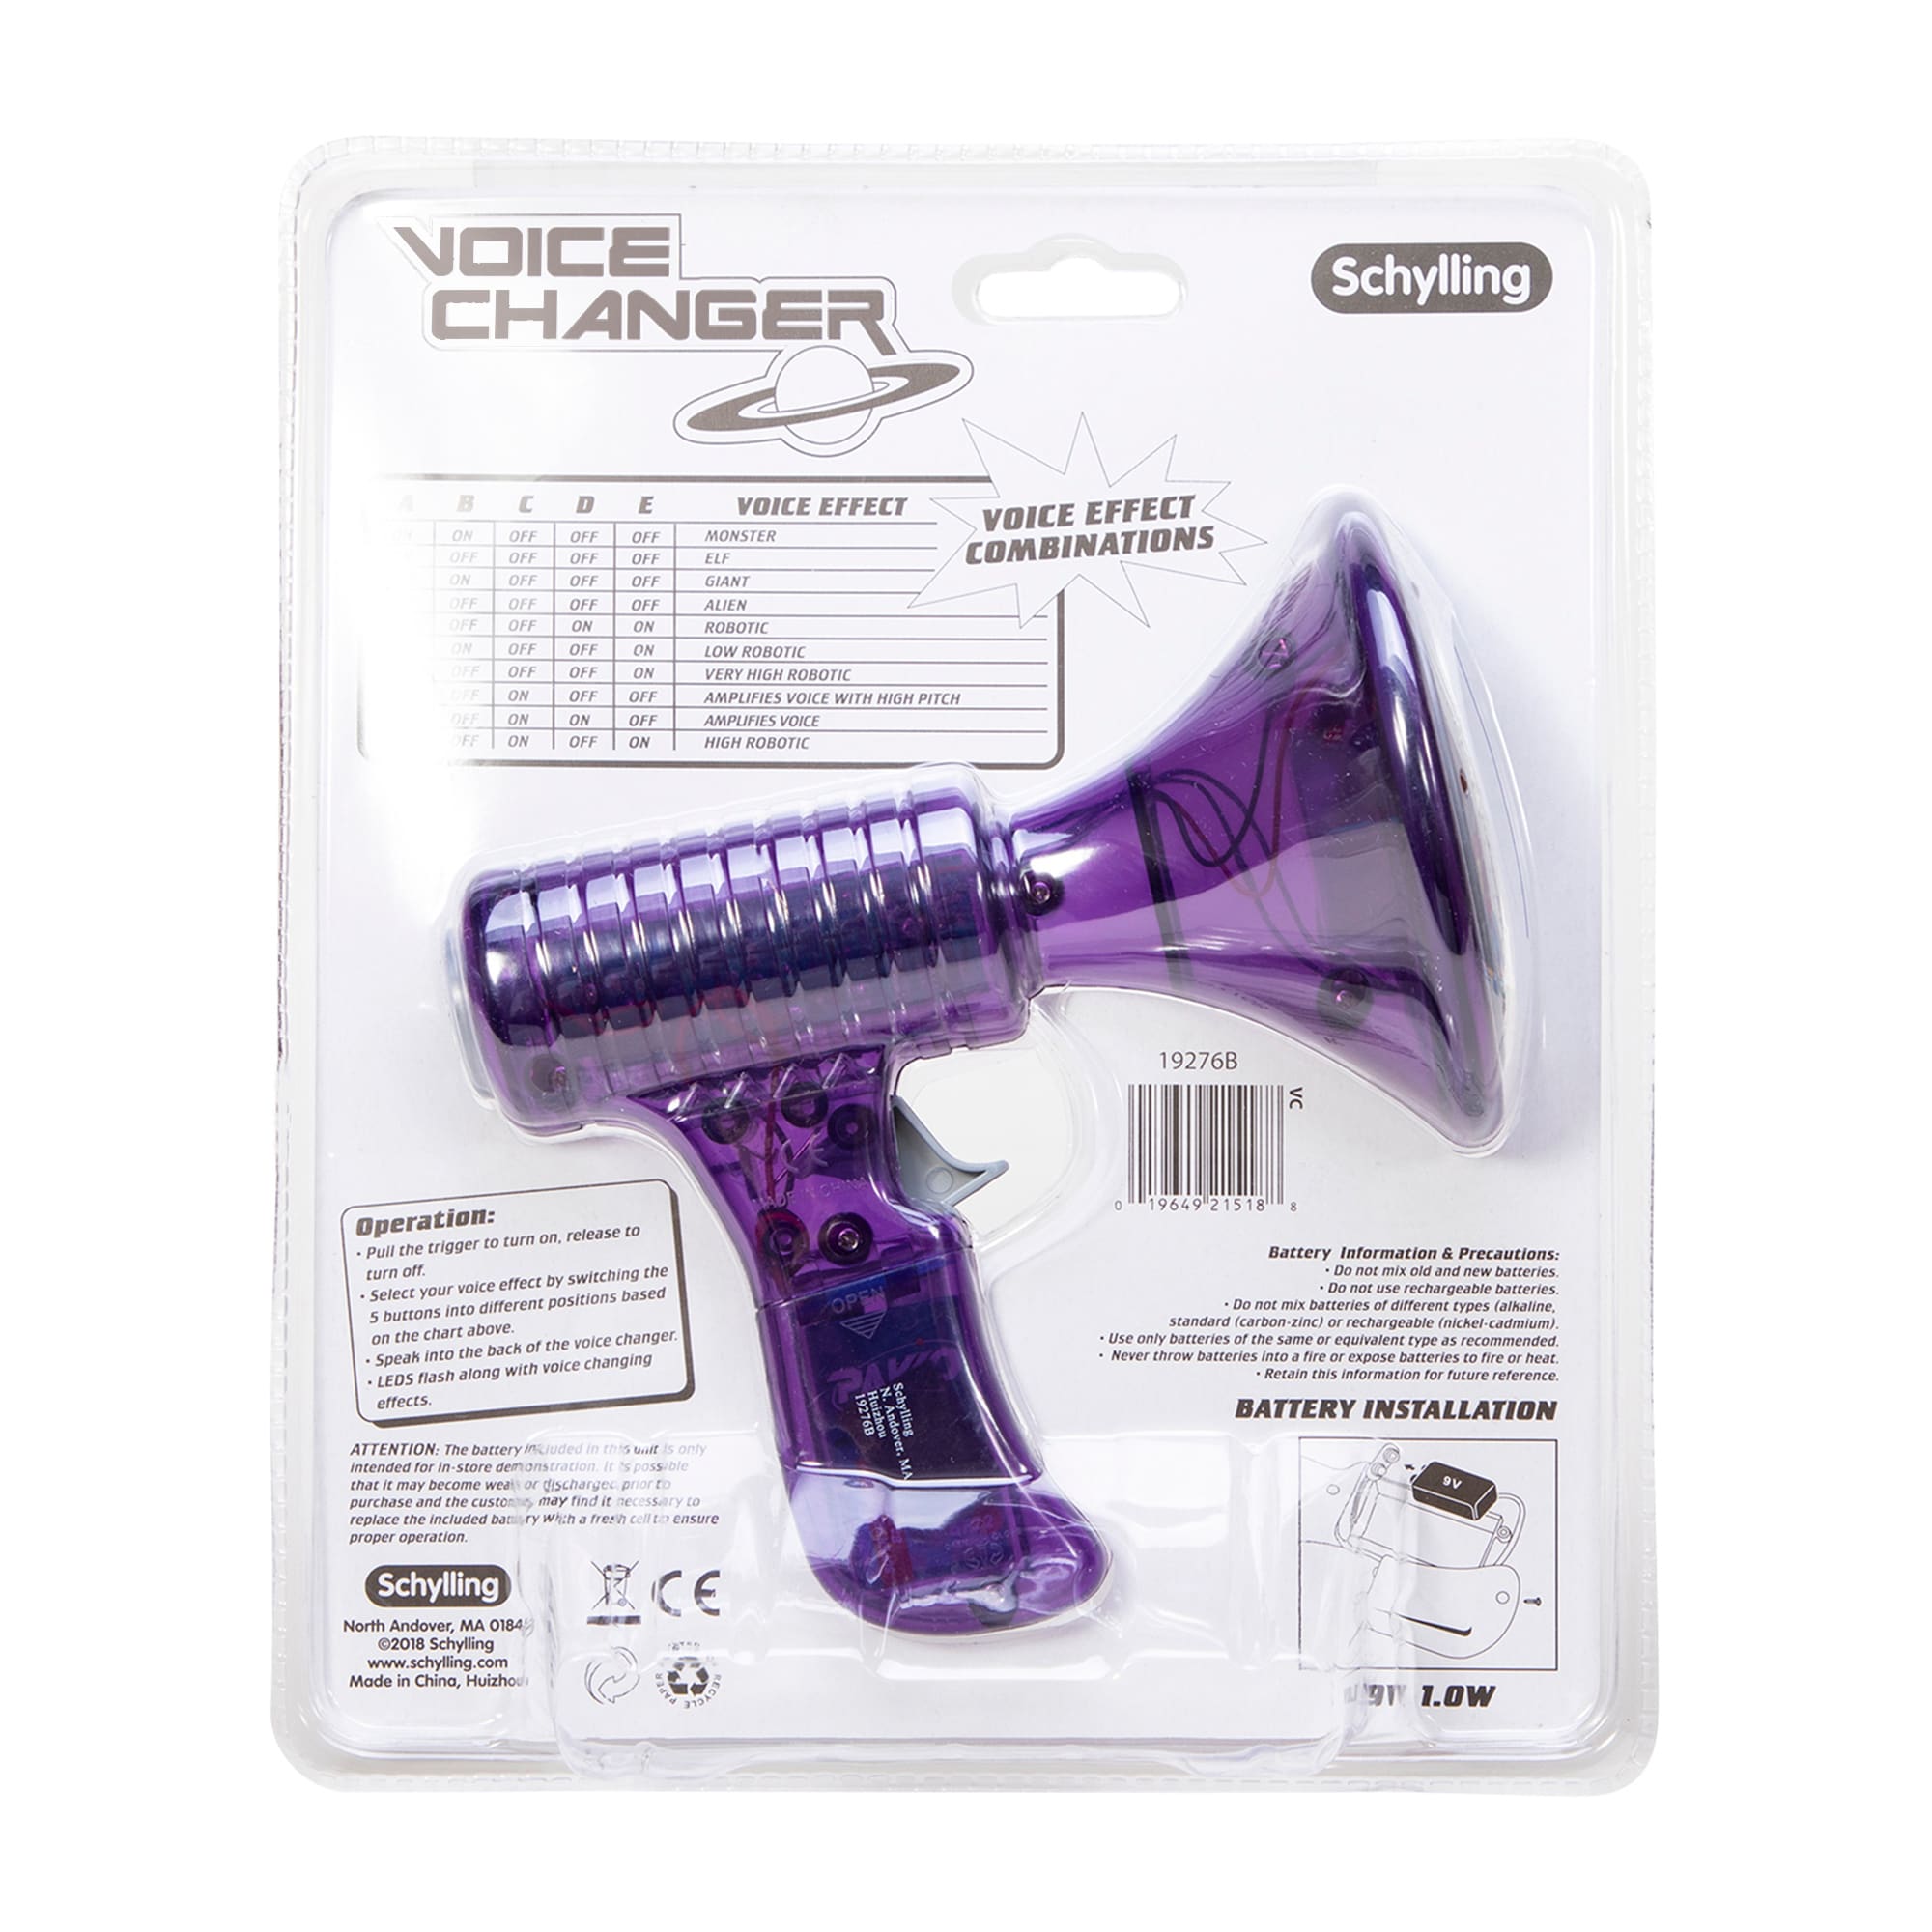 Voice Changer - Red, Blue or Purple    